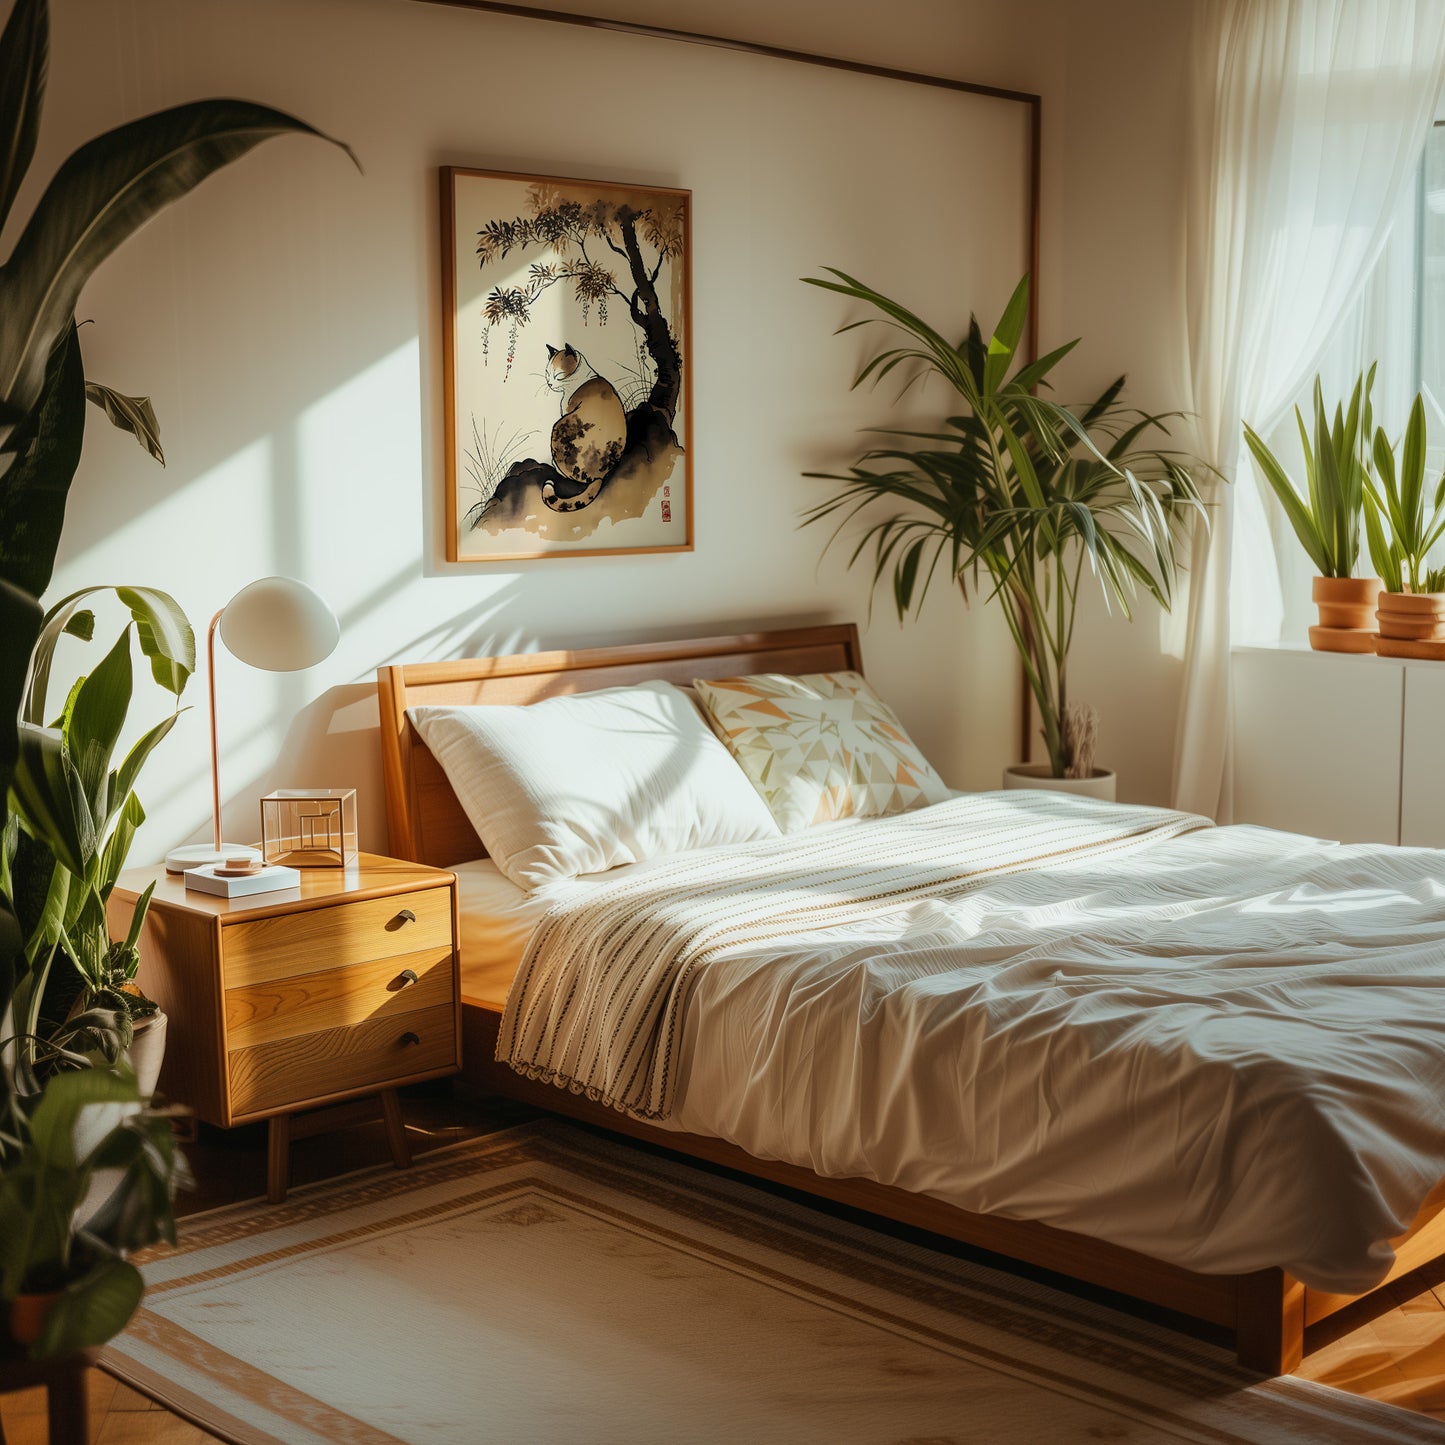 A cozy bedroom with a bed, side table, lamp, and plants in sunlight.